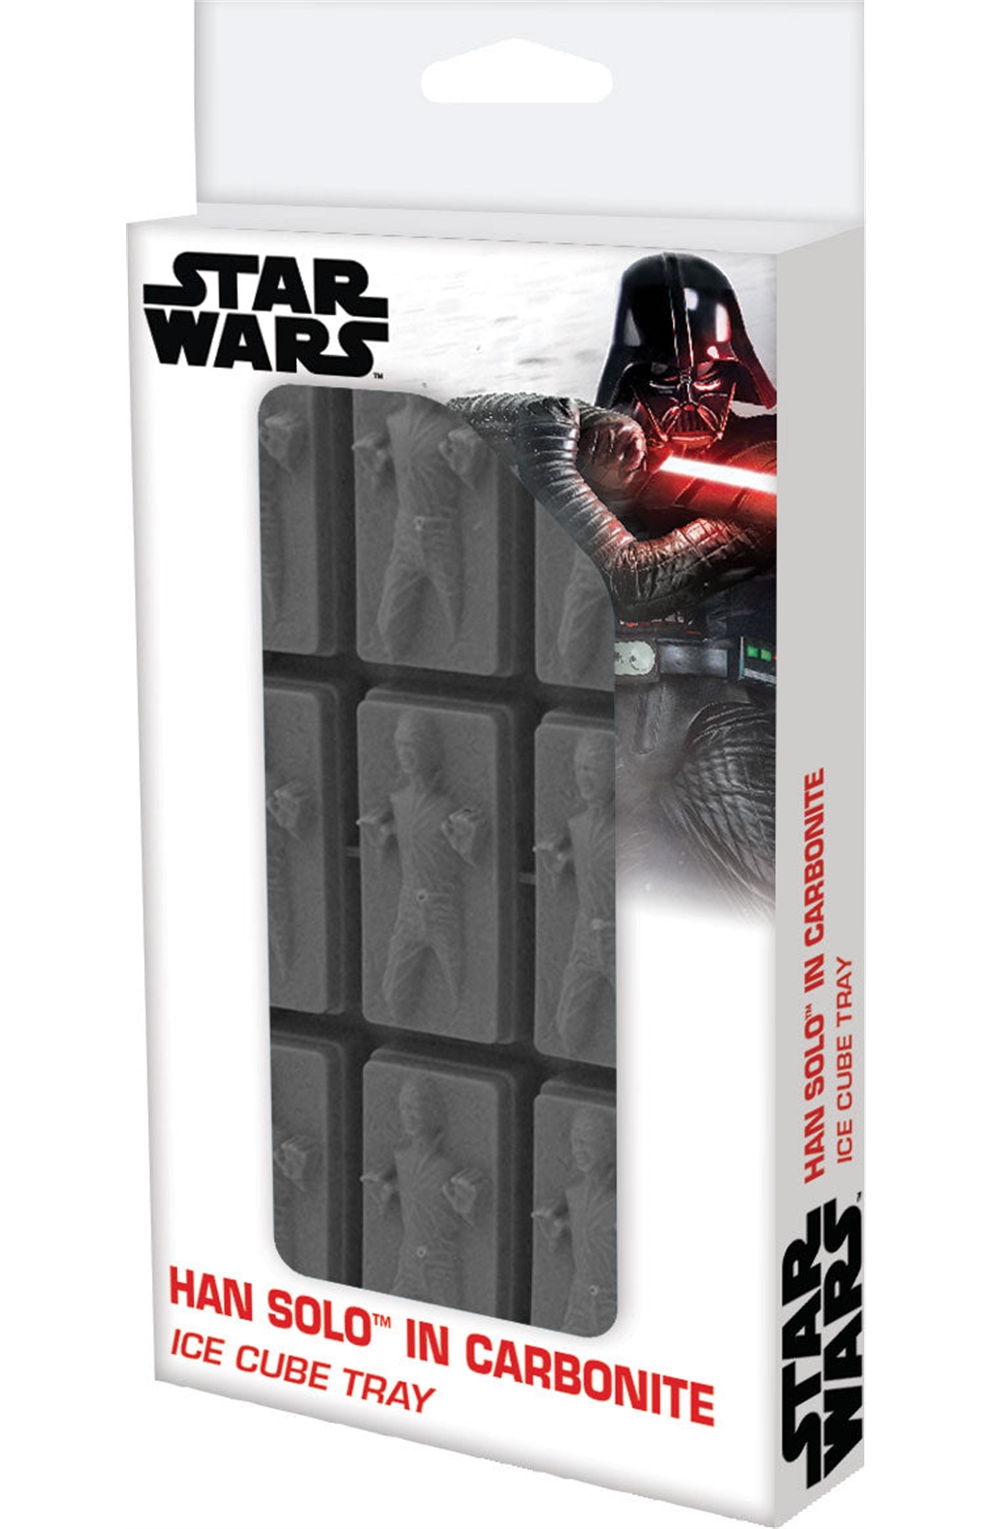 Lucas Star Wars Carbonite Han Solo Ice Cube Tray